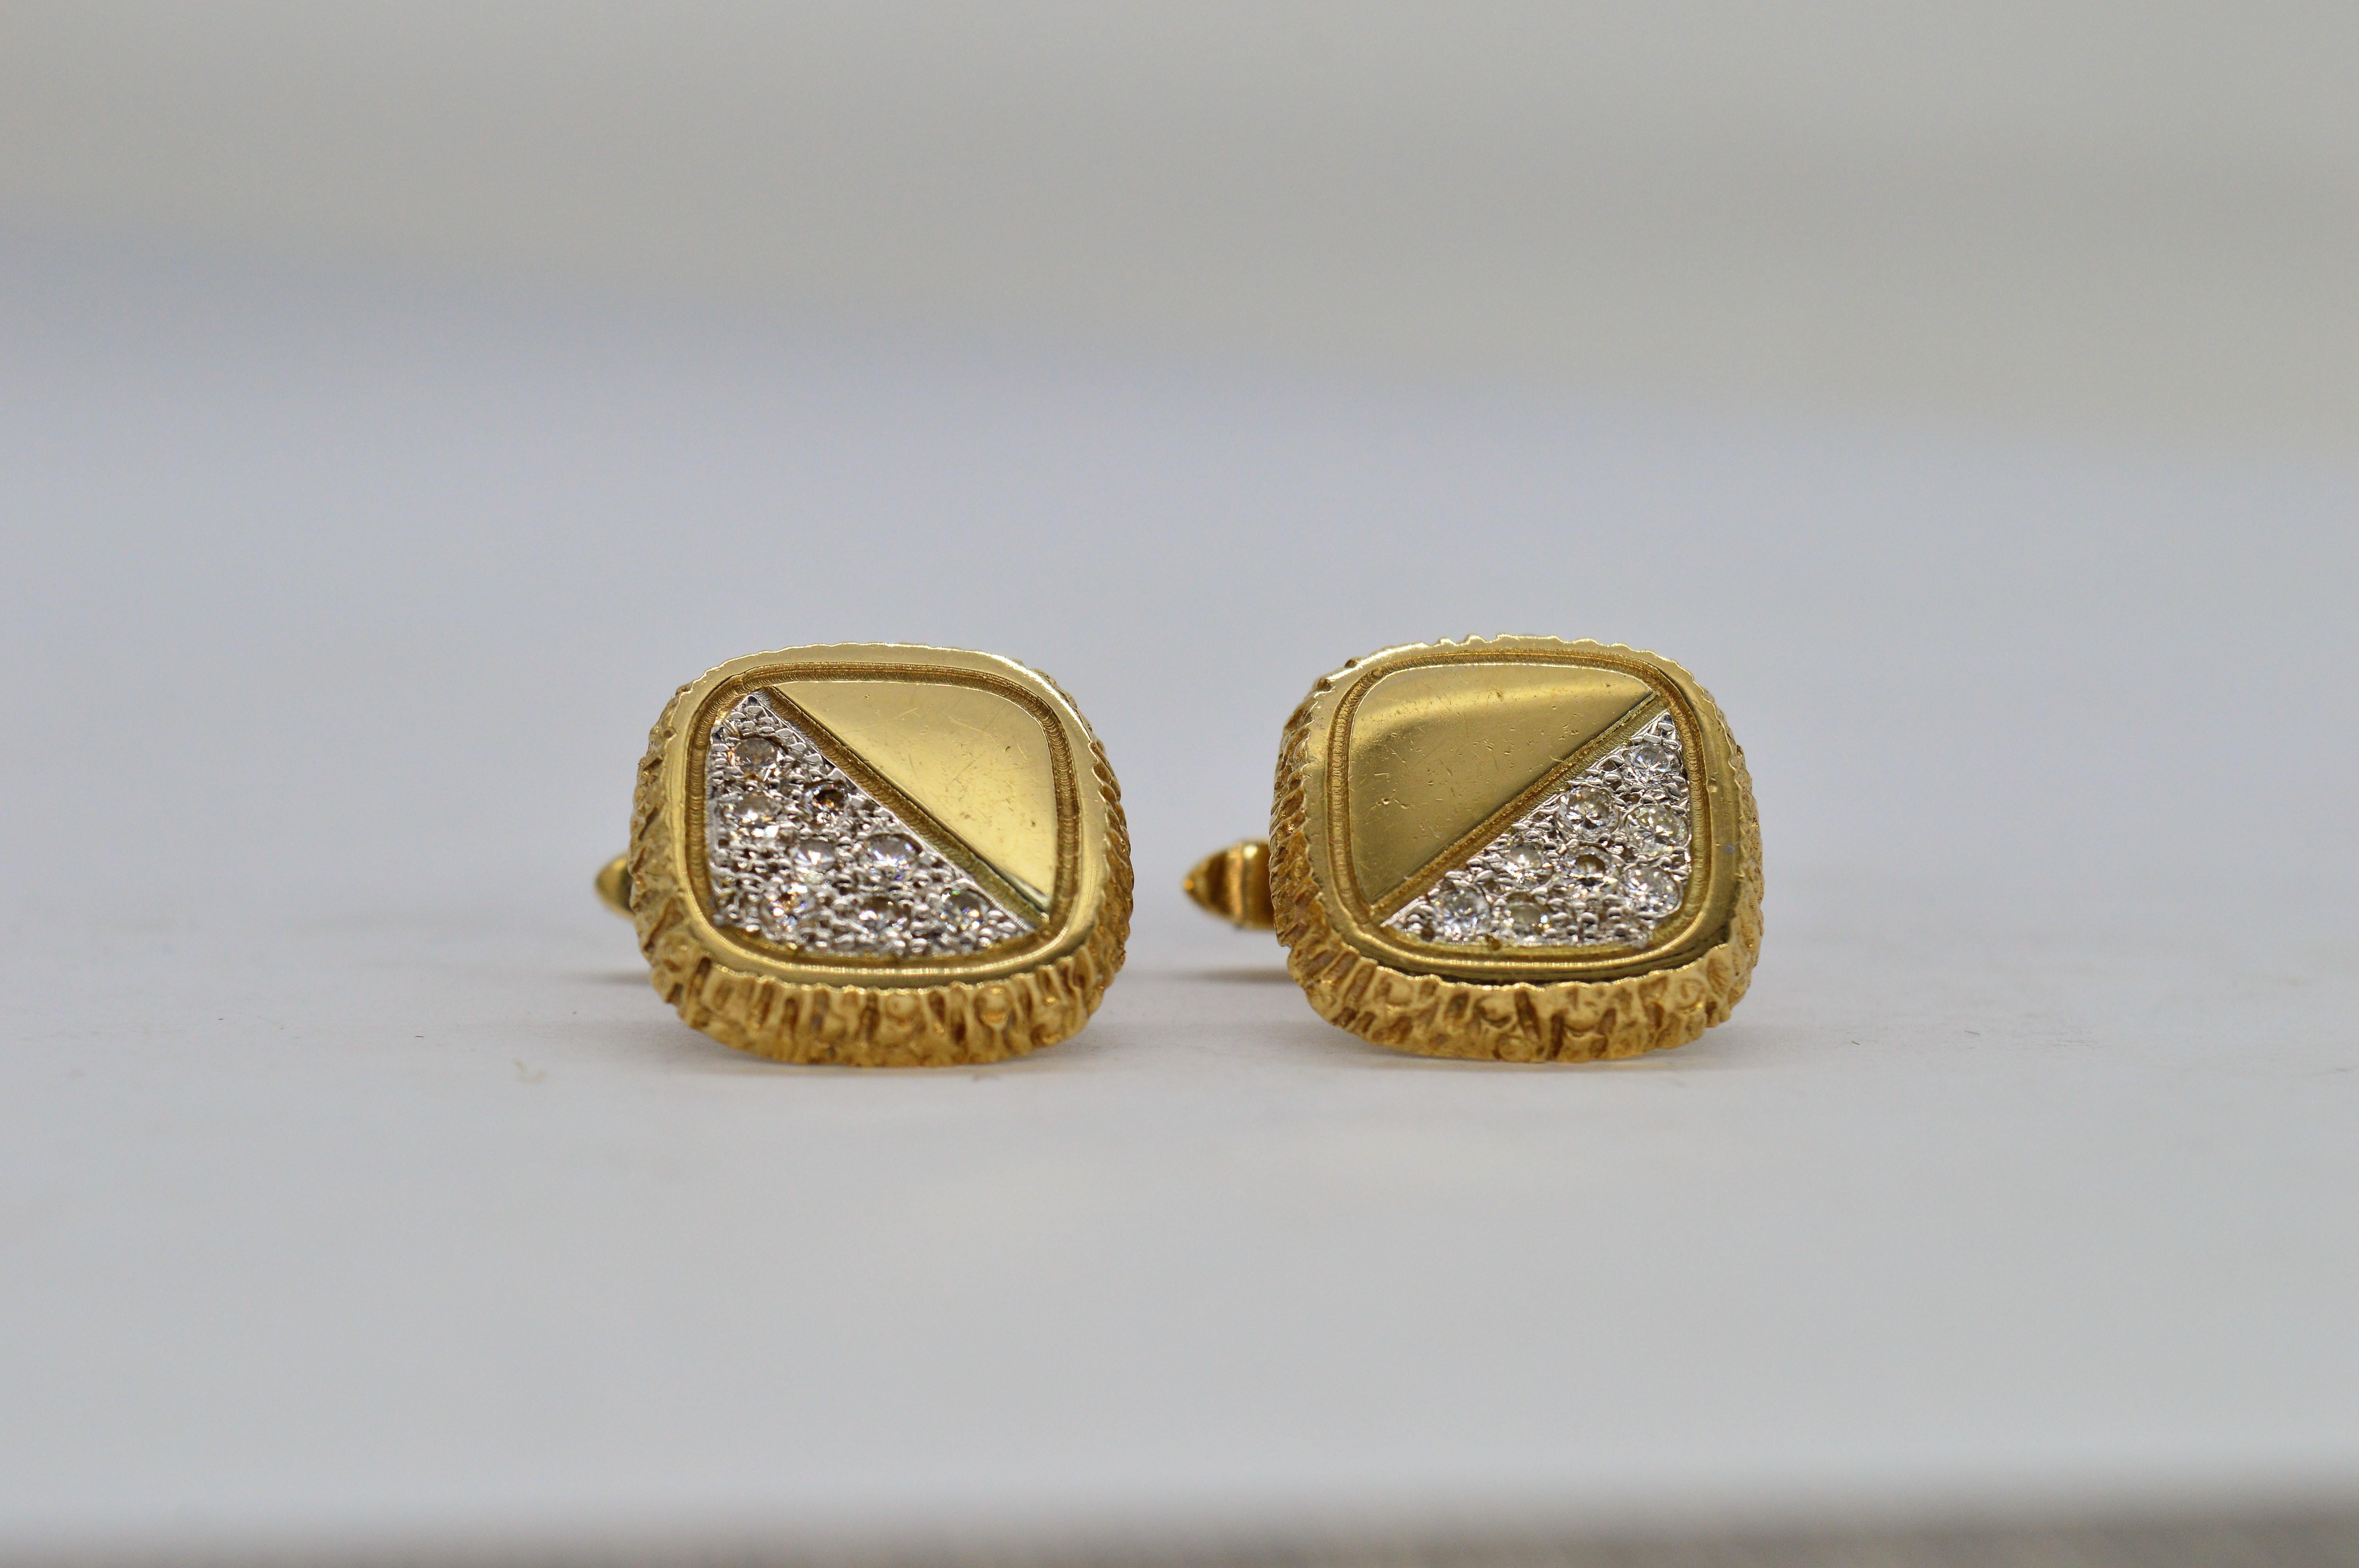 A set of 9ct yellow gold Diamond studded cufflinks made by Deakin and Francis

13.90g

We have sold to the set of Hit shows like Peaky Blinders and Outlander as well as to Buckingham Palace so our items are truly fit for royalty.

Through a decade